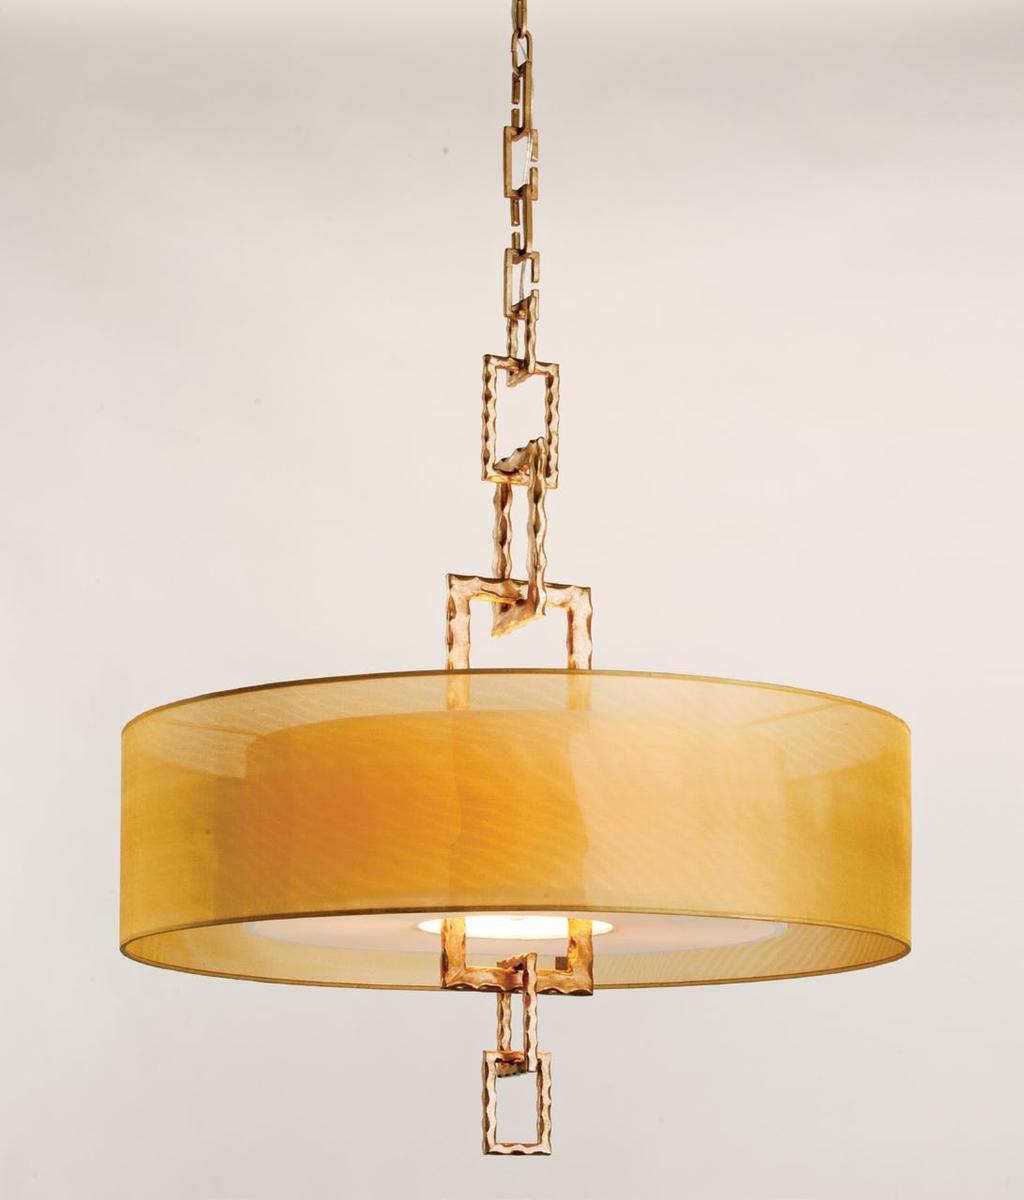 LINK F2876 32" w 38½" h mm: 813 w 978 h 4-60W MED BASE FF2876 4-18W GU24 CFL (INCLUDED) o p t i o n a l links EACH CHANDELIER IS FURNISHED WITH THREE